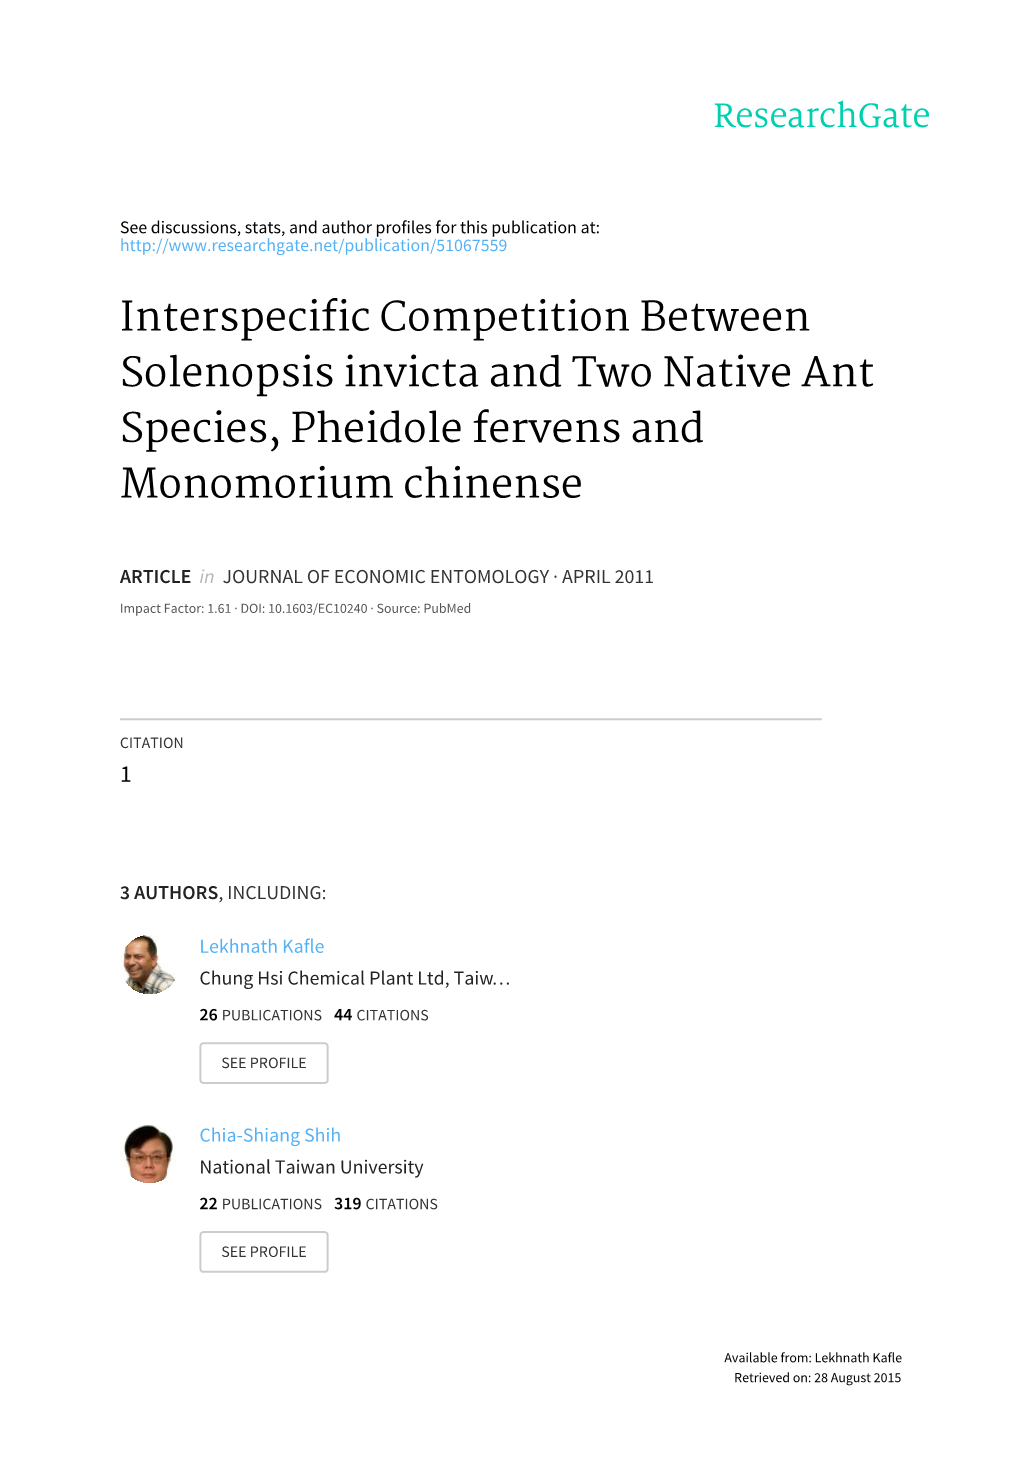 Interspecific Competition Between Solenopsis Invicta and Two Native Ant Species, Pheidole Fervens and Monomorium Chinense